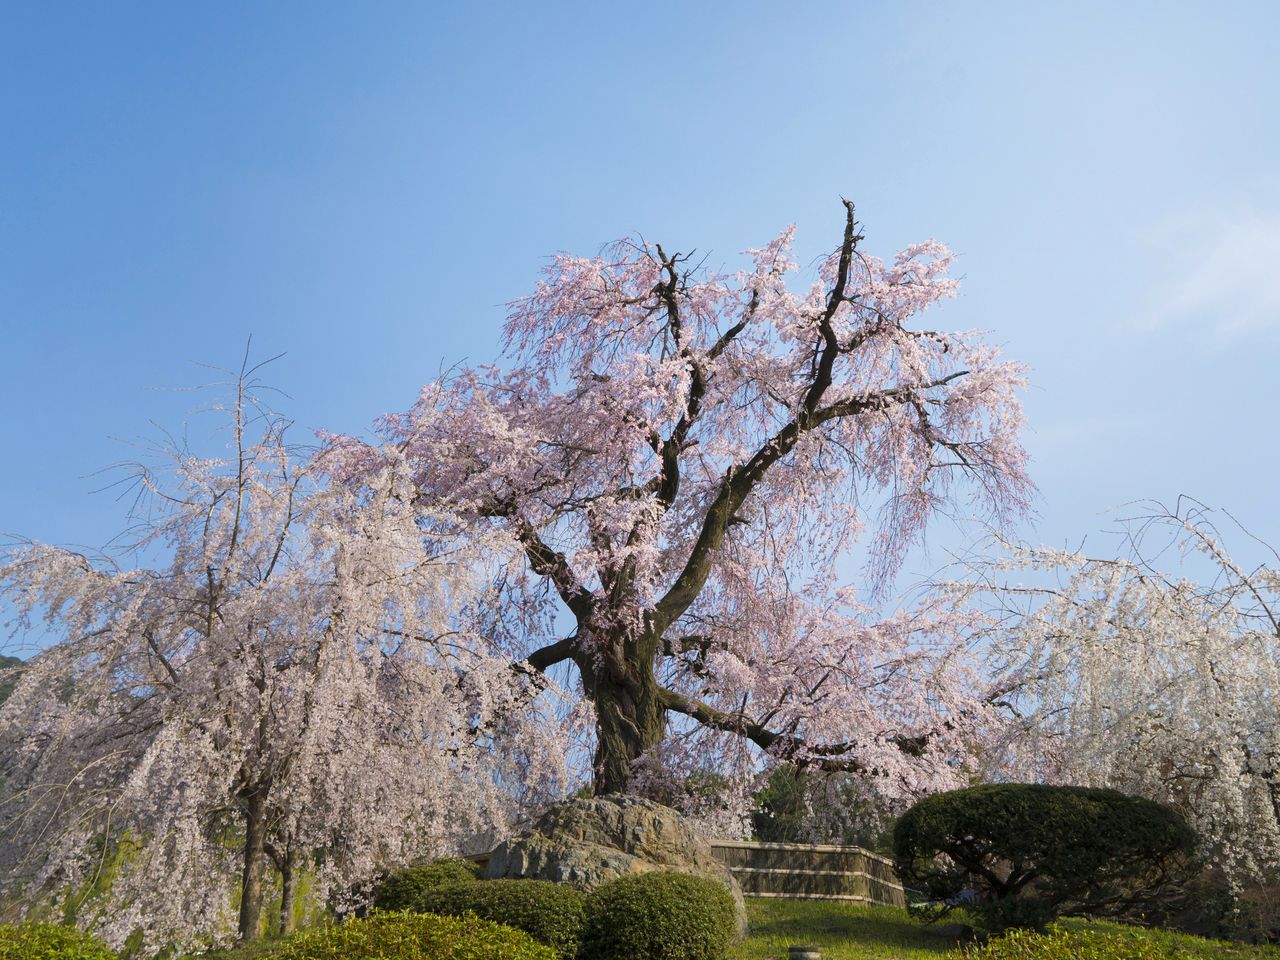 Against a clear blue sky, the blossom-laden branches of the elegant Gion weeping cherry wave in the breeze.